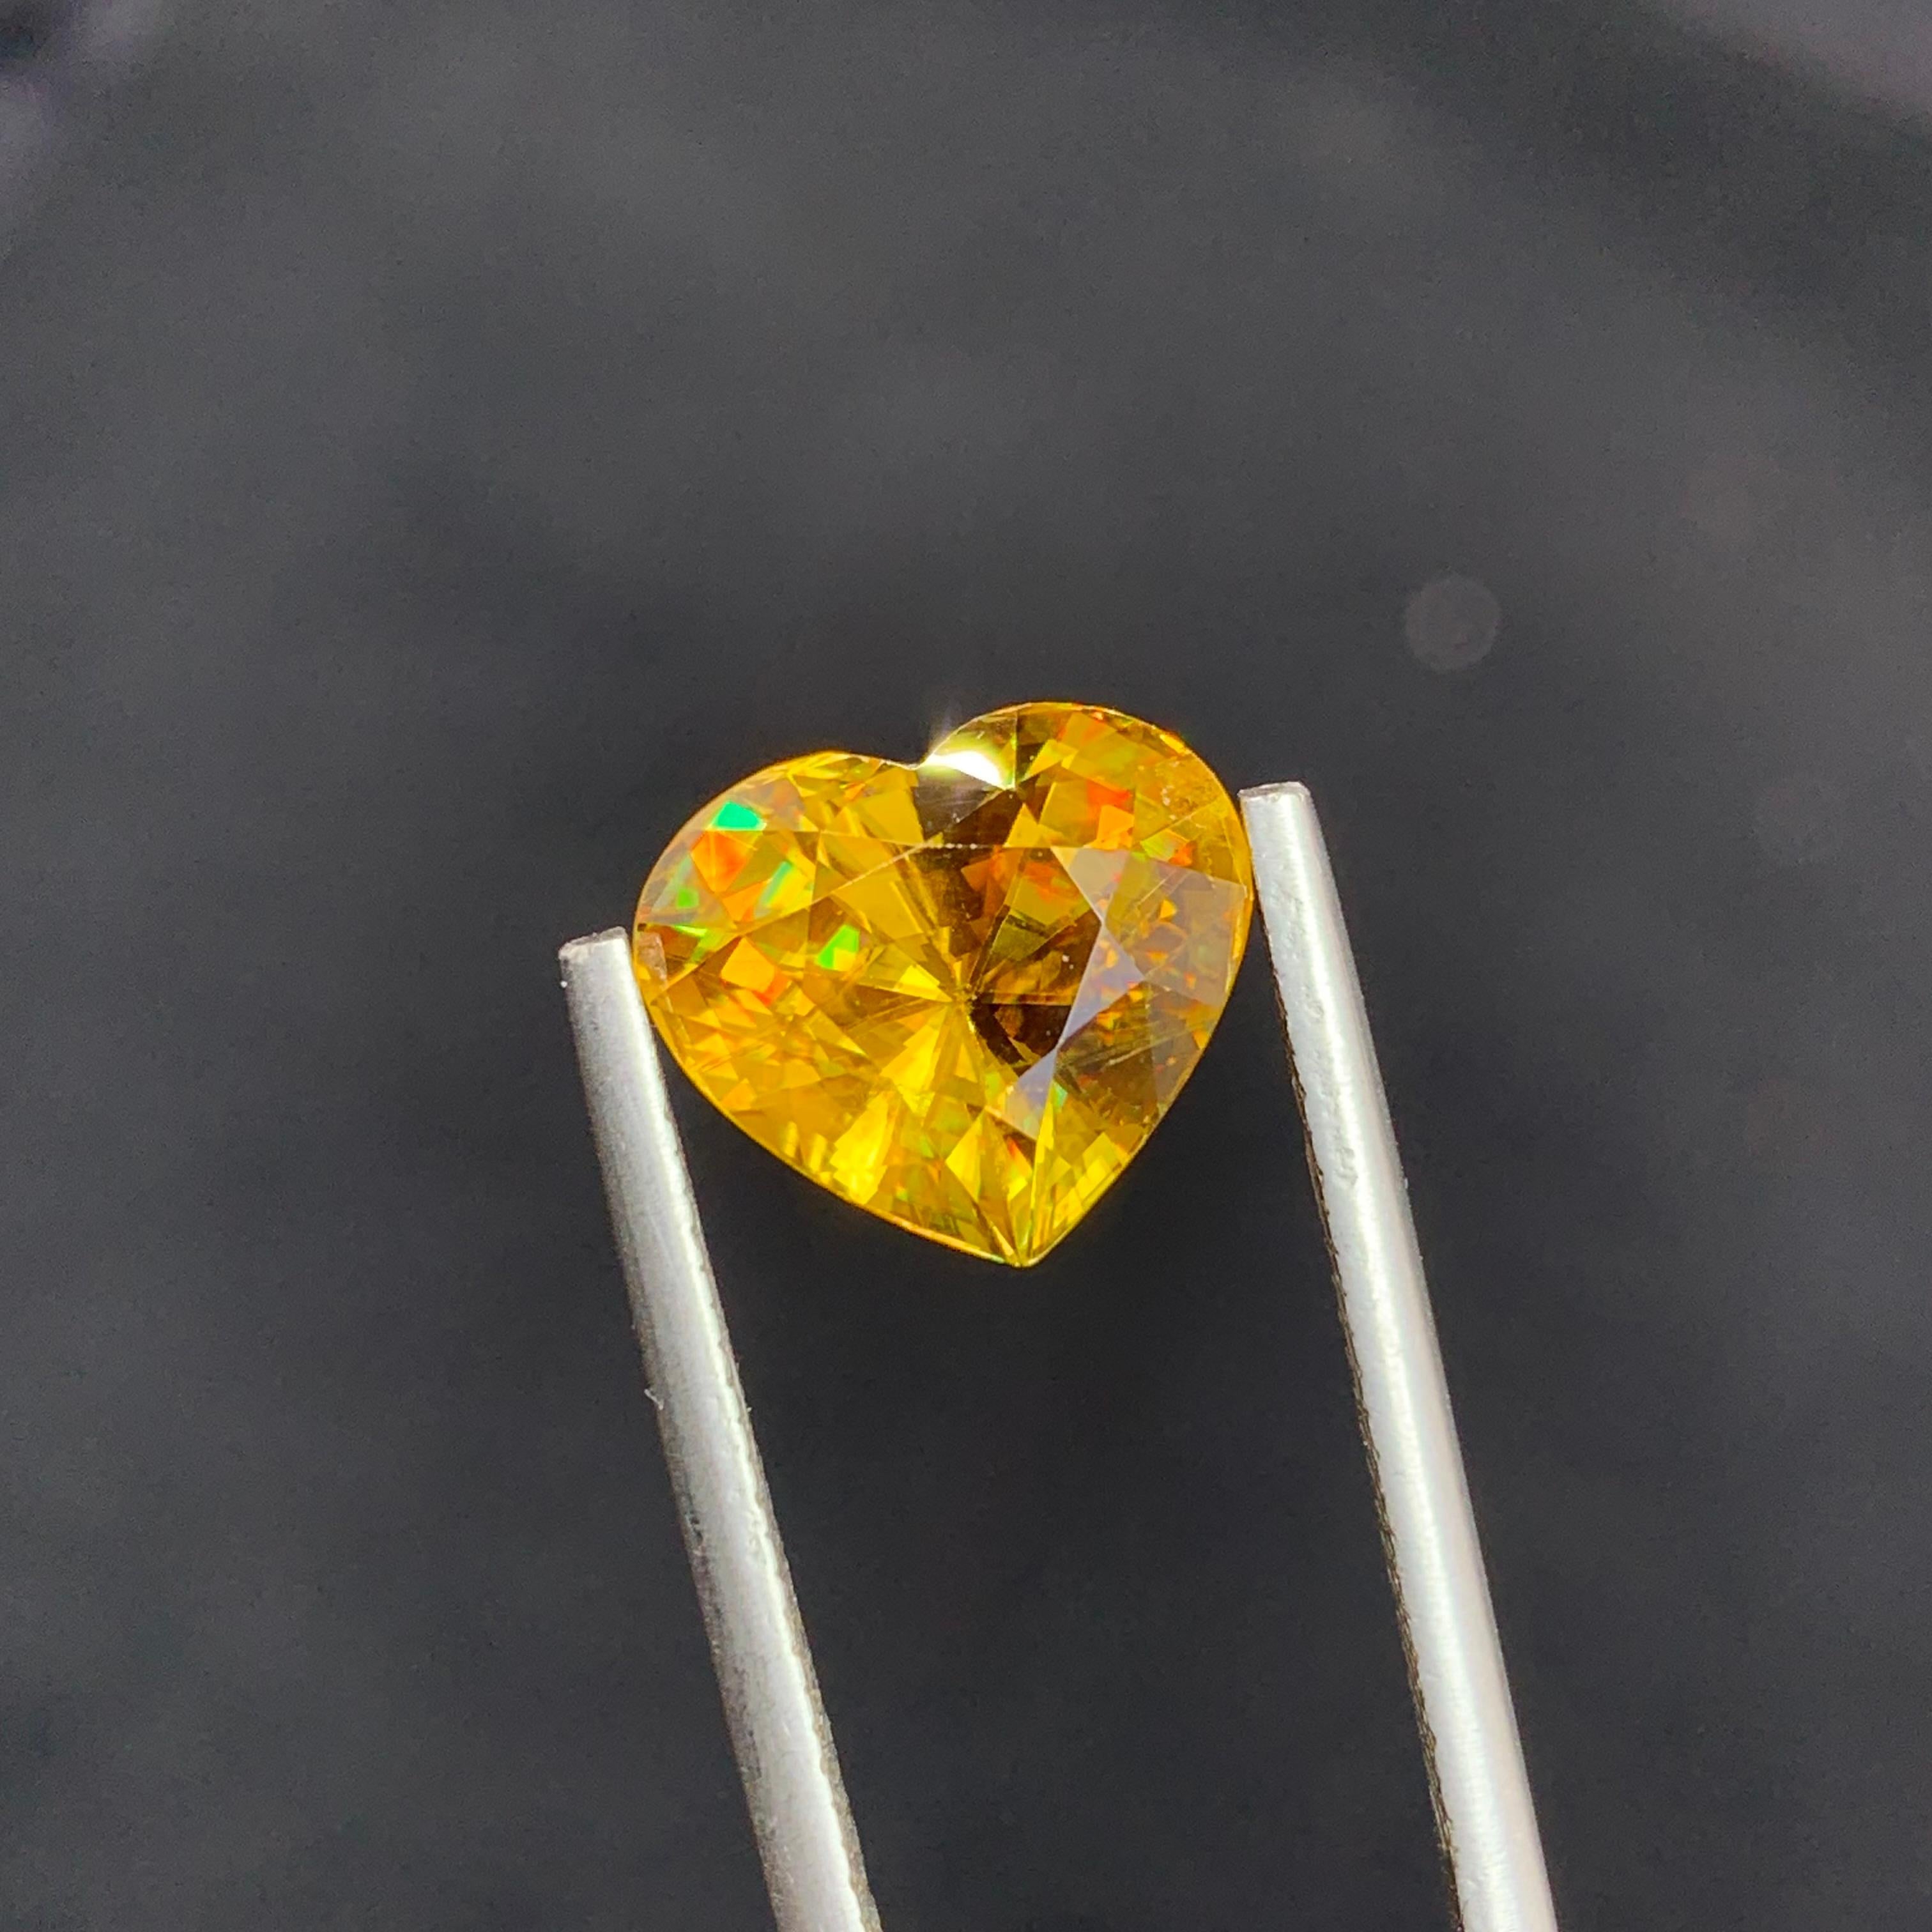 Loose Sphene
Weight: 5.30 Carats
Dimension: 10.2 x 11.6 x 6.8 Mm
Origin: Warsak Pakistan
Shape: Heart 
Color: Yellow Fire
Treatment: Non
Certificate: On Demand

Sphene, also known as titanite, is a remarkable and lesser-known gemstone that has